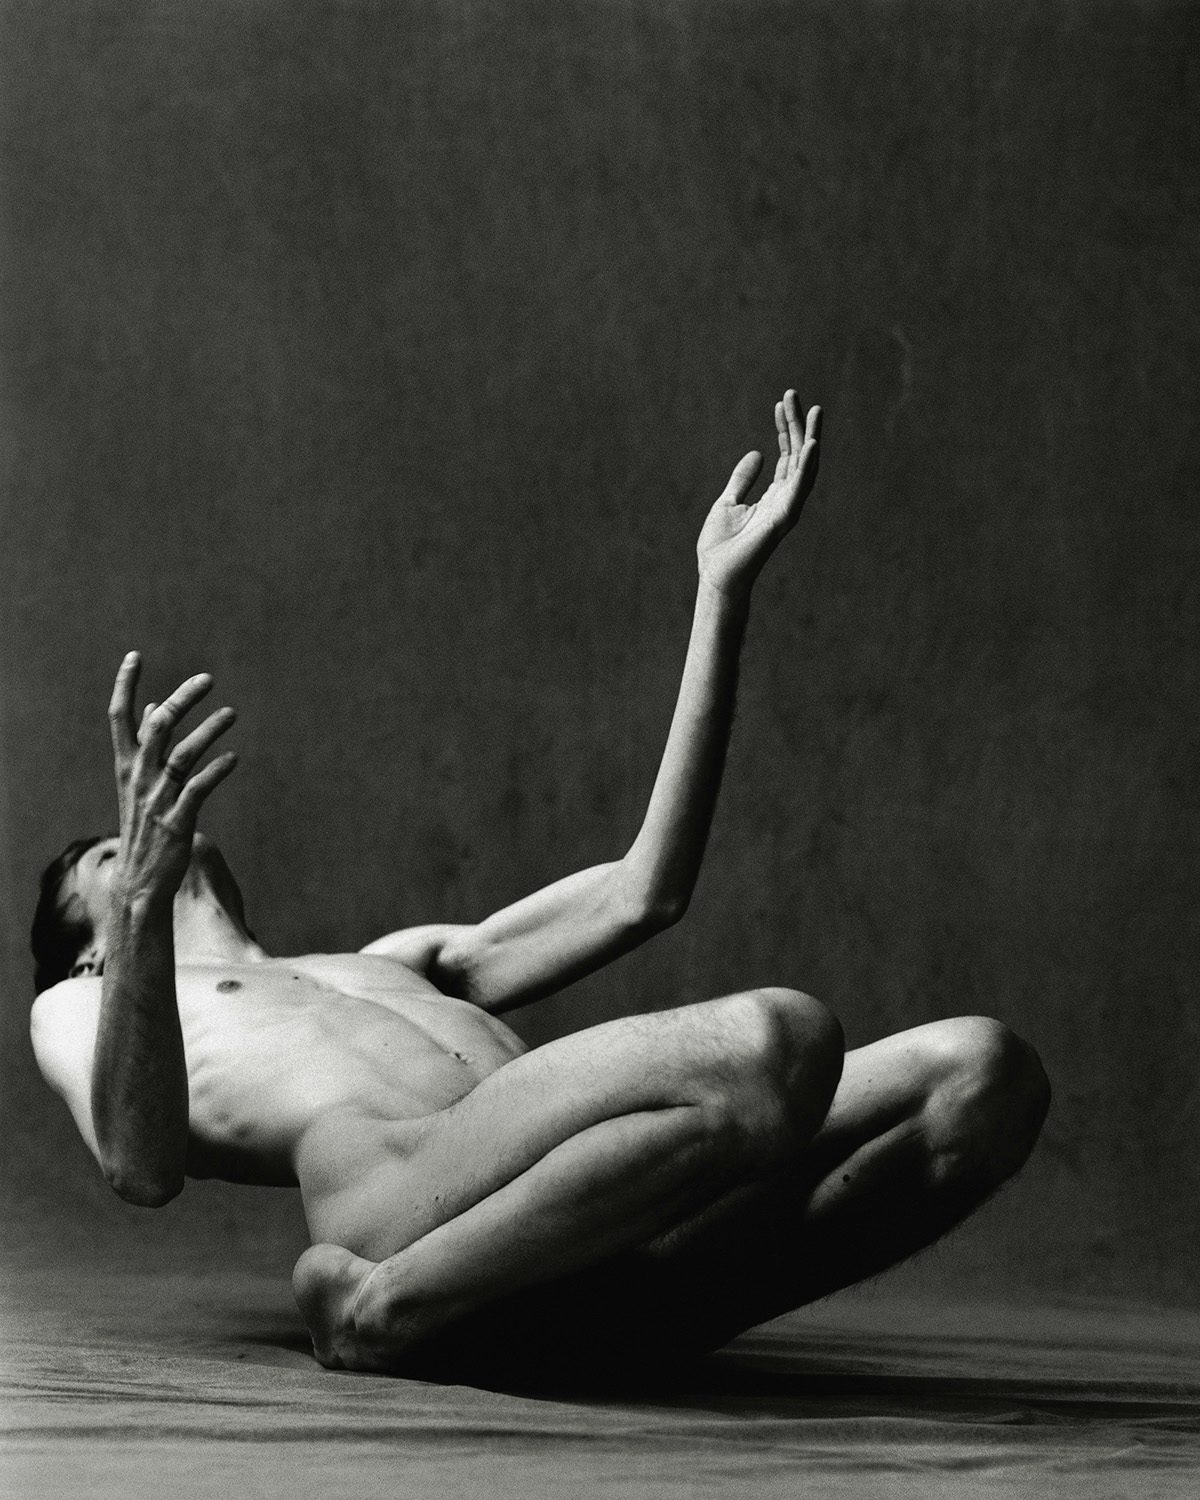 Black and white photograph from O by Luis Alberto Rodriguez, showing a person crouching on the ground leaning backwards with their arms raised in the air